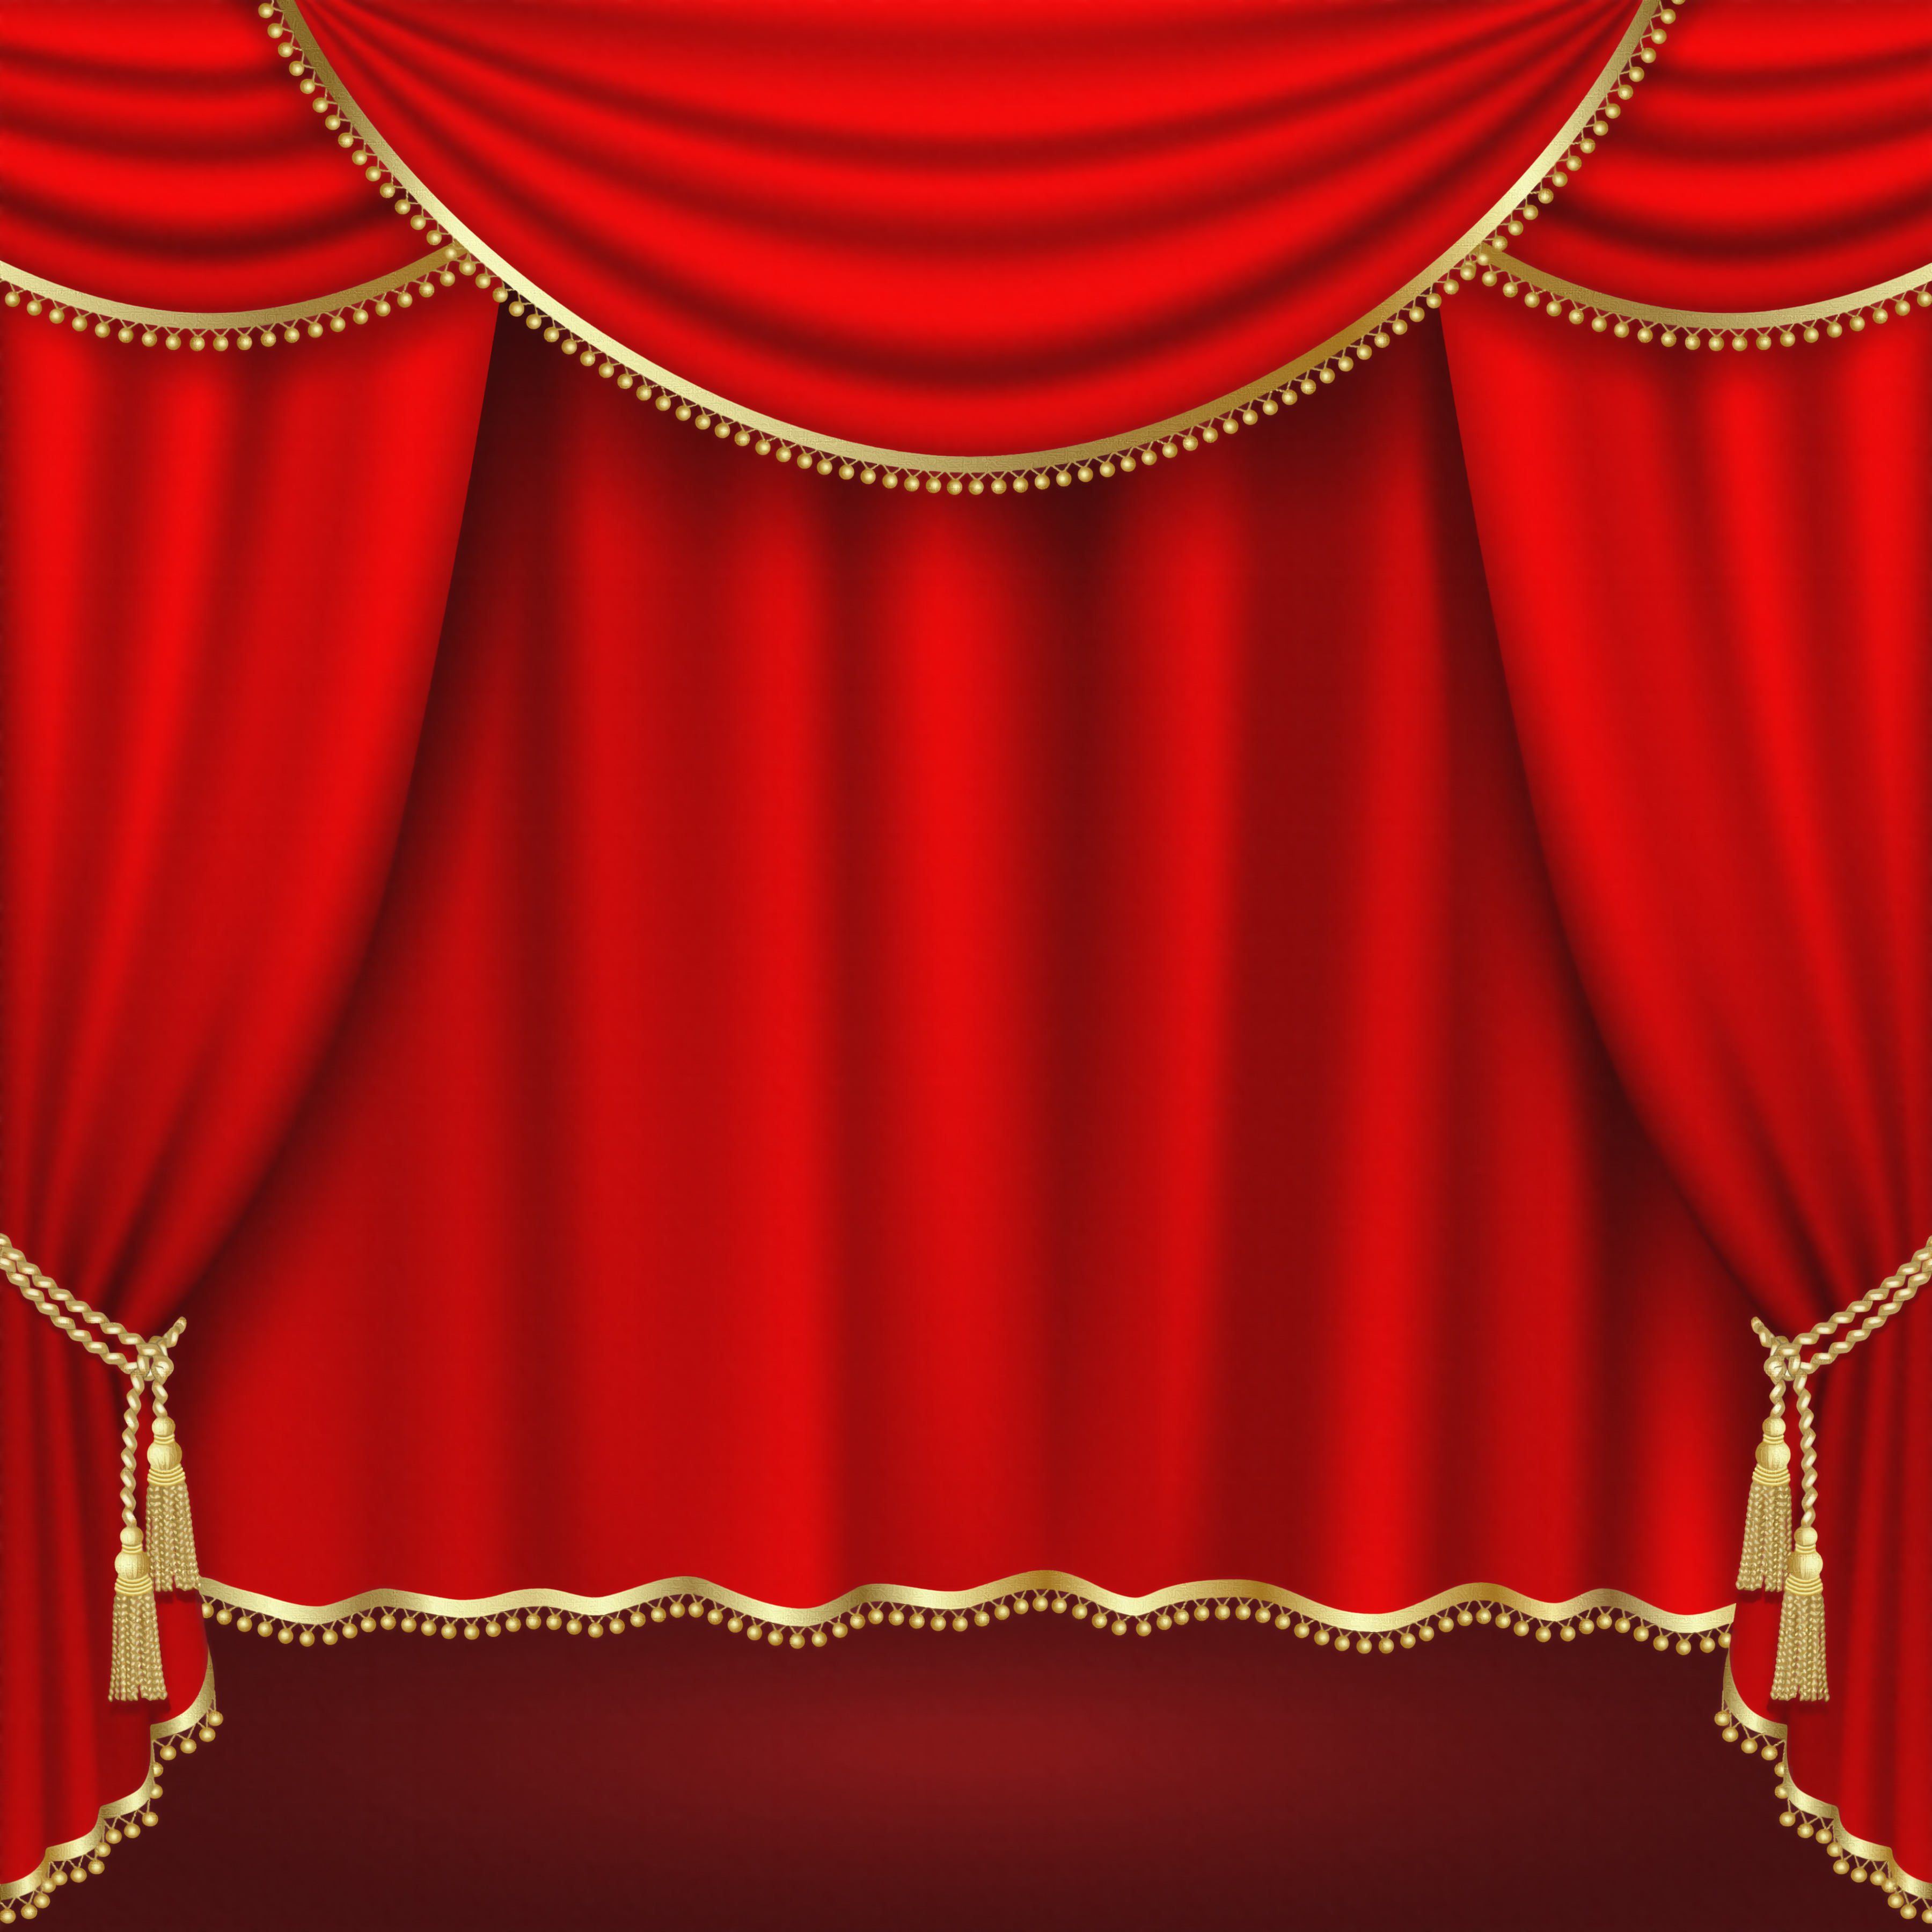 Red Curtains Background Gallery Yopriceville High Quality